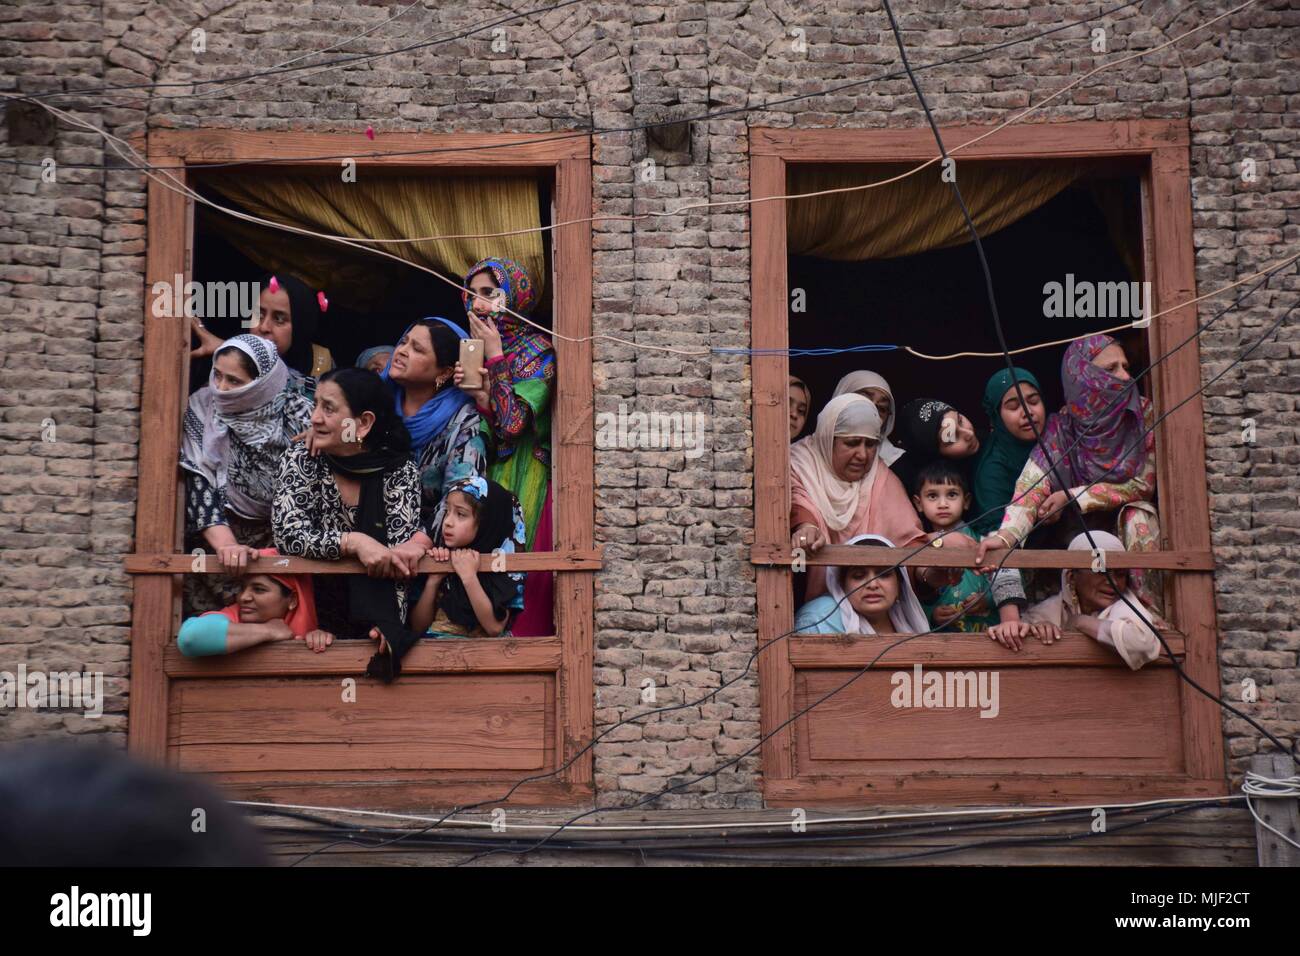 Srinagar, Jammu & Kashmir, India, May 5, 2018.  People watching funeral procession of Local Militant Fayaz Ahmed Hamal at his residence Khankah area of Srinagar Summer Capital Of Indian Kashmir on Saturday.Multiple Funeral processions held in srinagar summer capital of Indian Kashmir on Saturday of Fayaz Ahmed Hamal a LeT (Lashkar-e-Taiba) Militant and a Civilian Adil Ahmed Yatoo who were killed by armoured vehicle on Saturday during clashes near Encounter site.litant at their residence. Credit: ZUMA Press, Inc./Alamy Live News Stock Photo